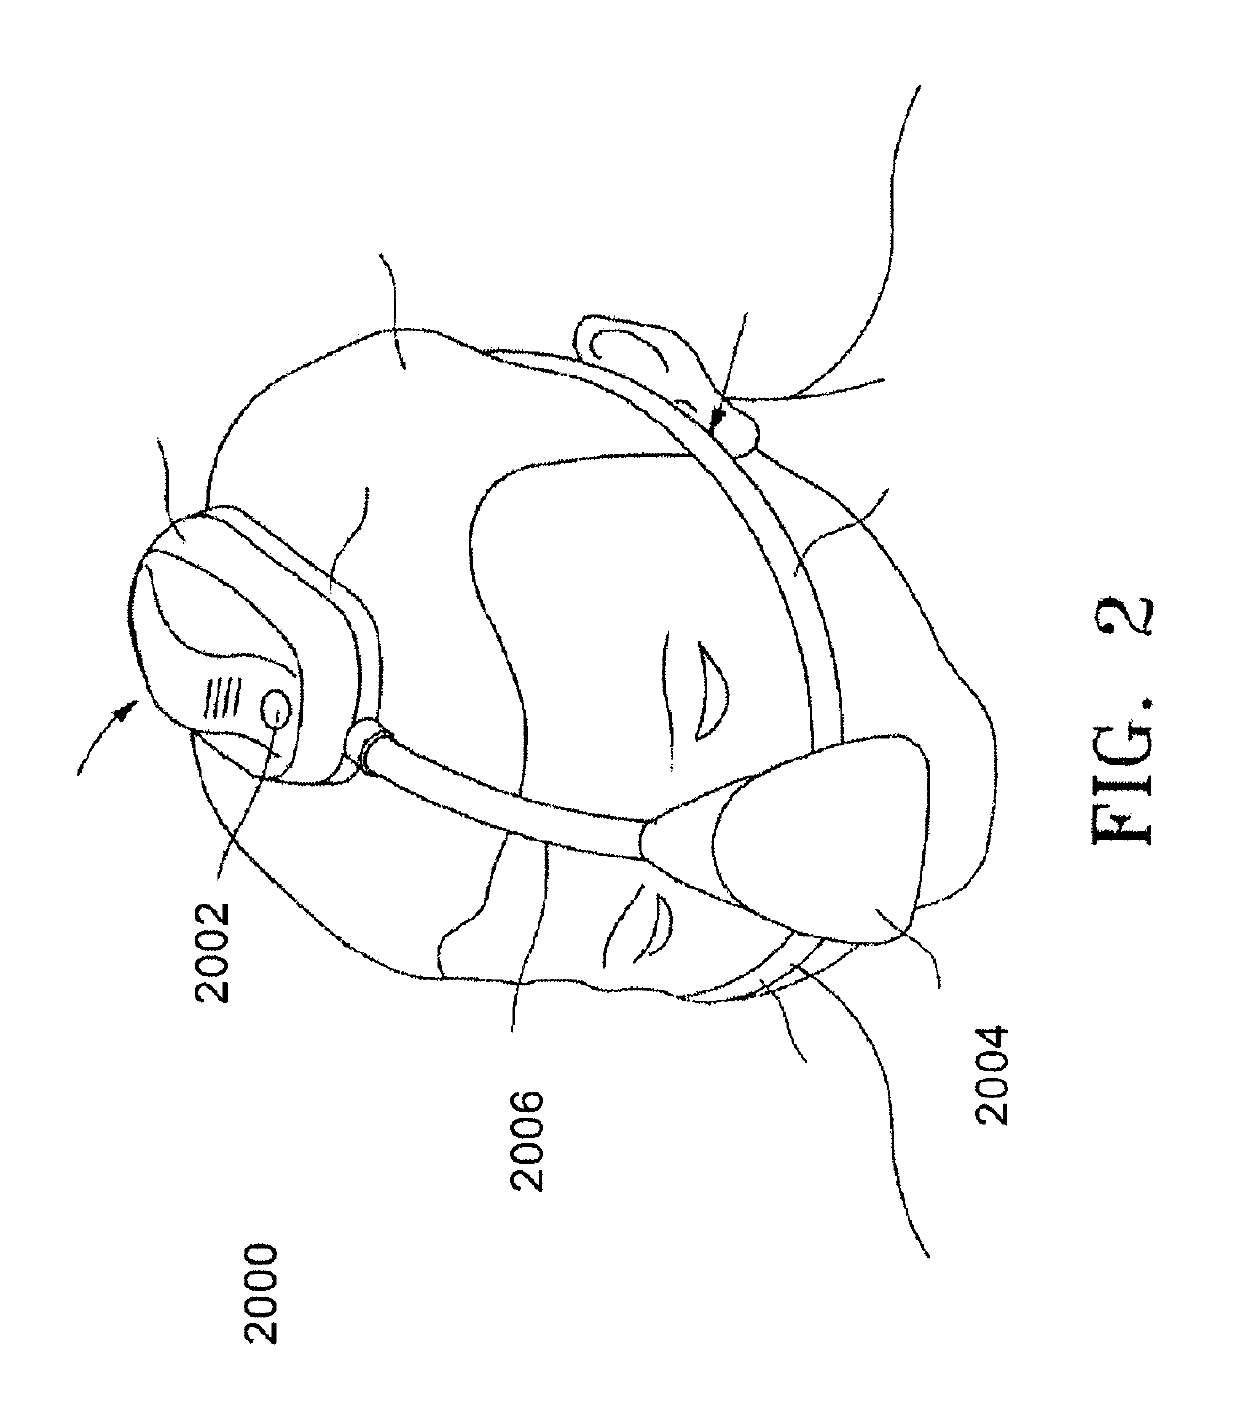 Position control devices and methods for use with positive airway pressure systems